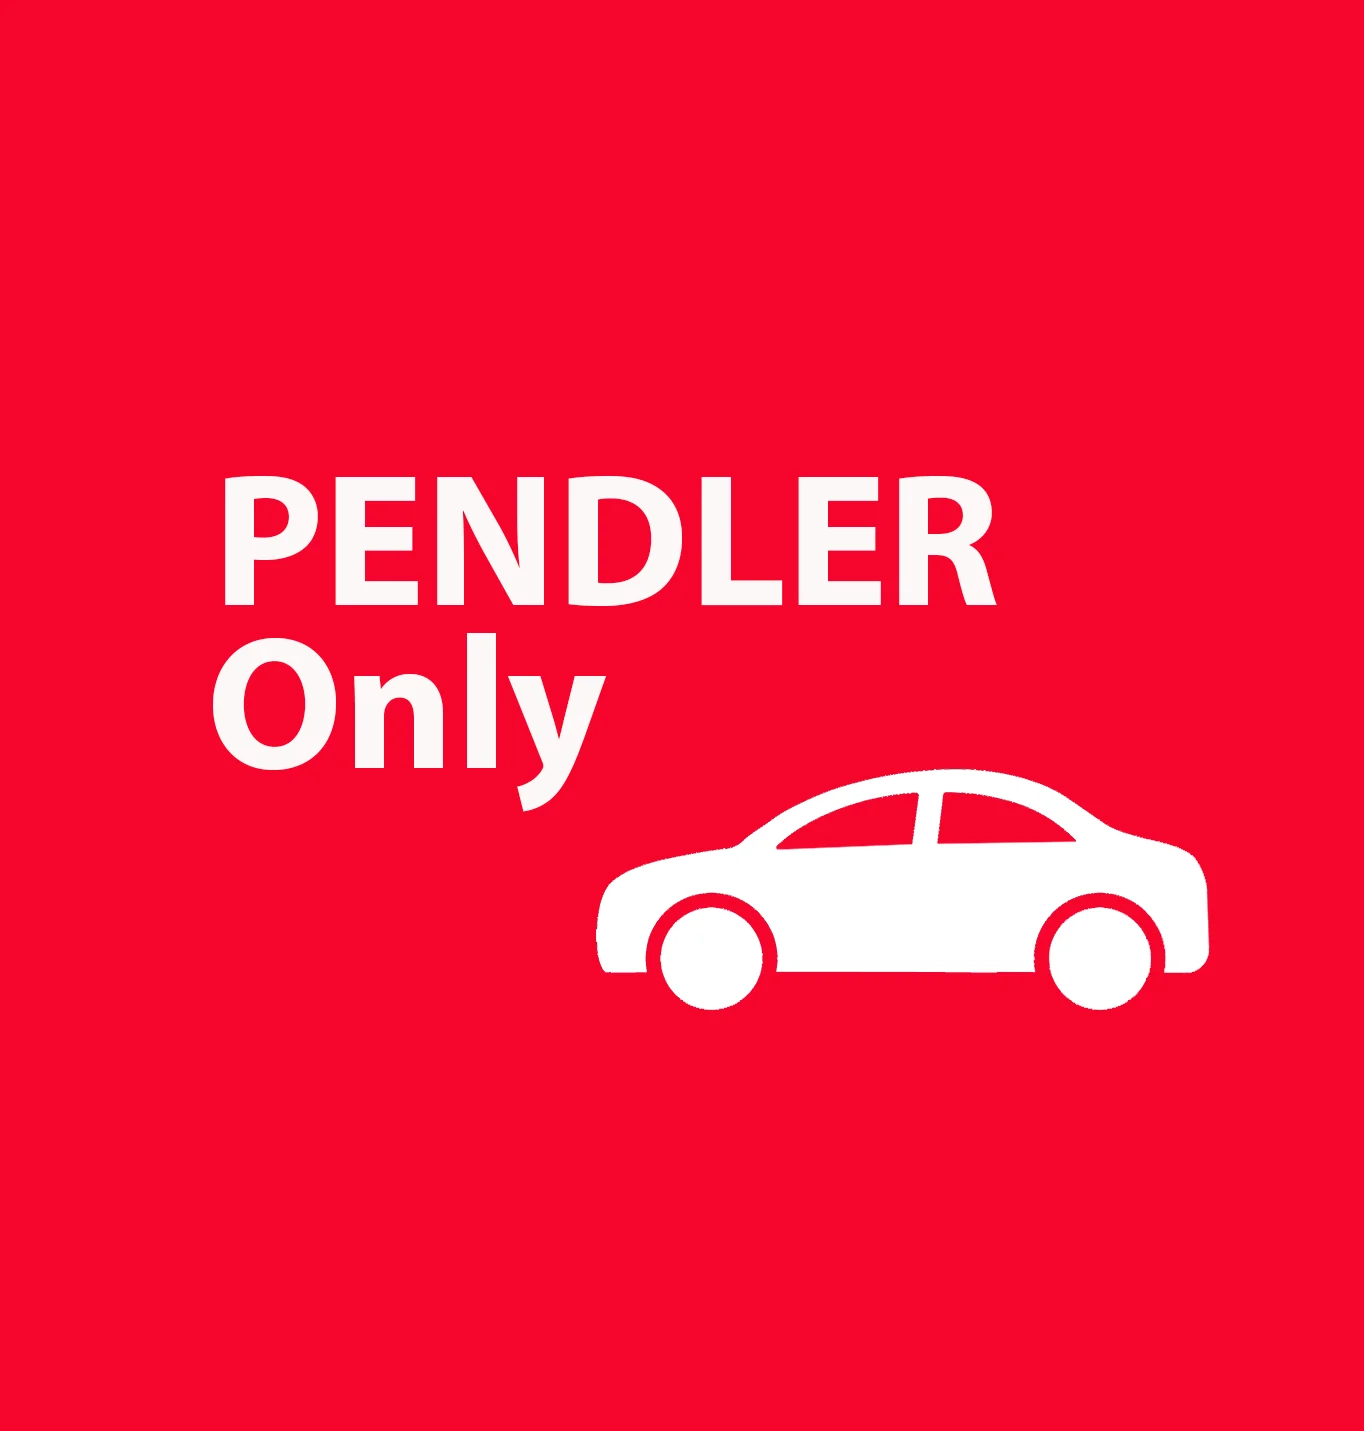 Red sign with white text saying PENDLER Only and a picture of a car.